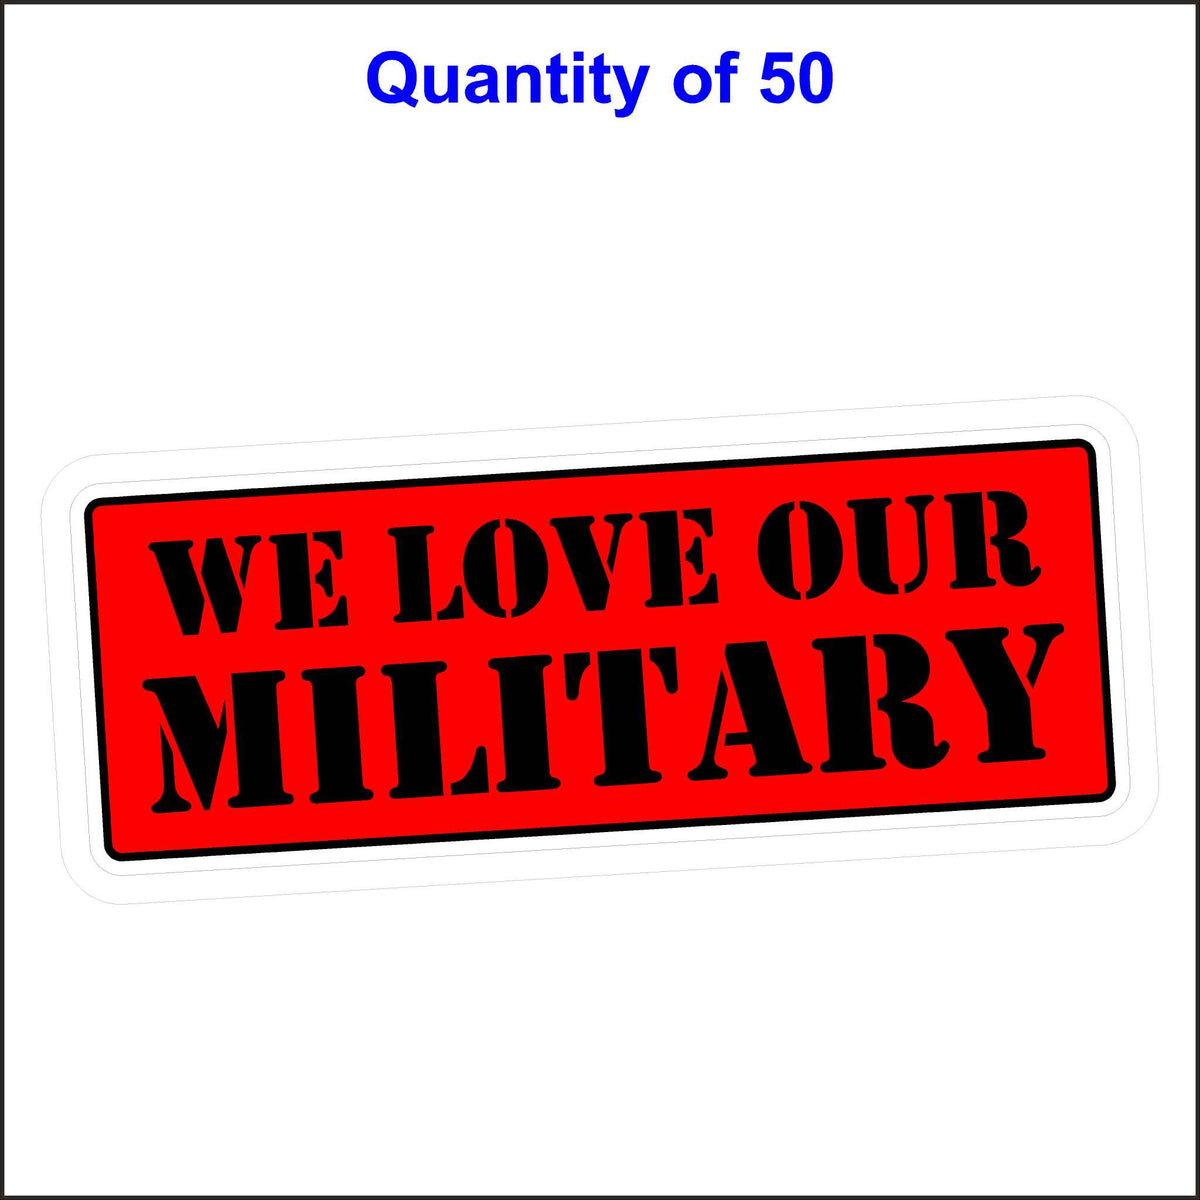 Military Stickers - We Love Our Military. 50 Quantity.